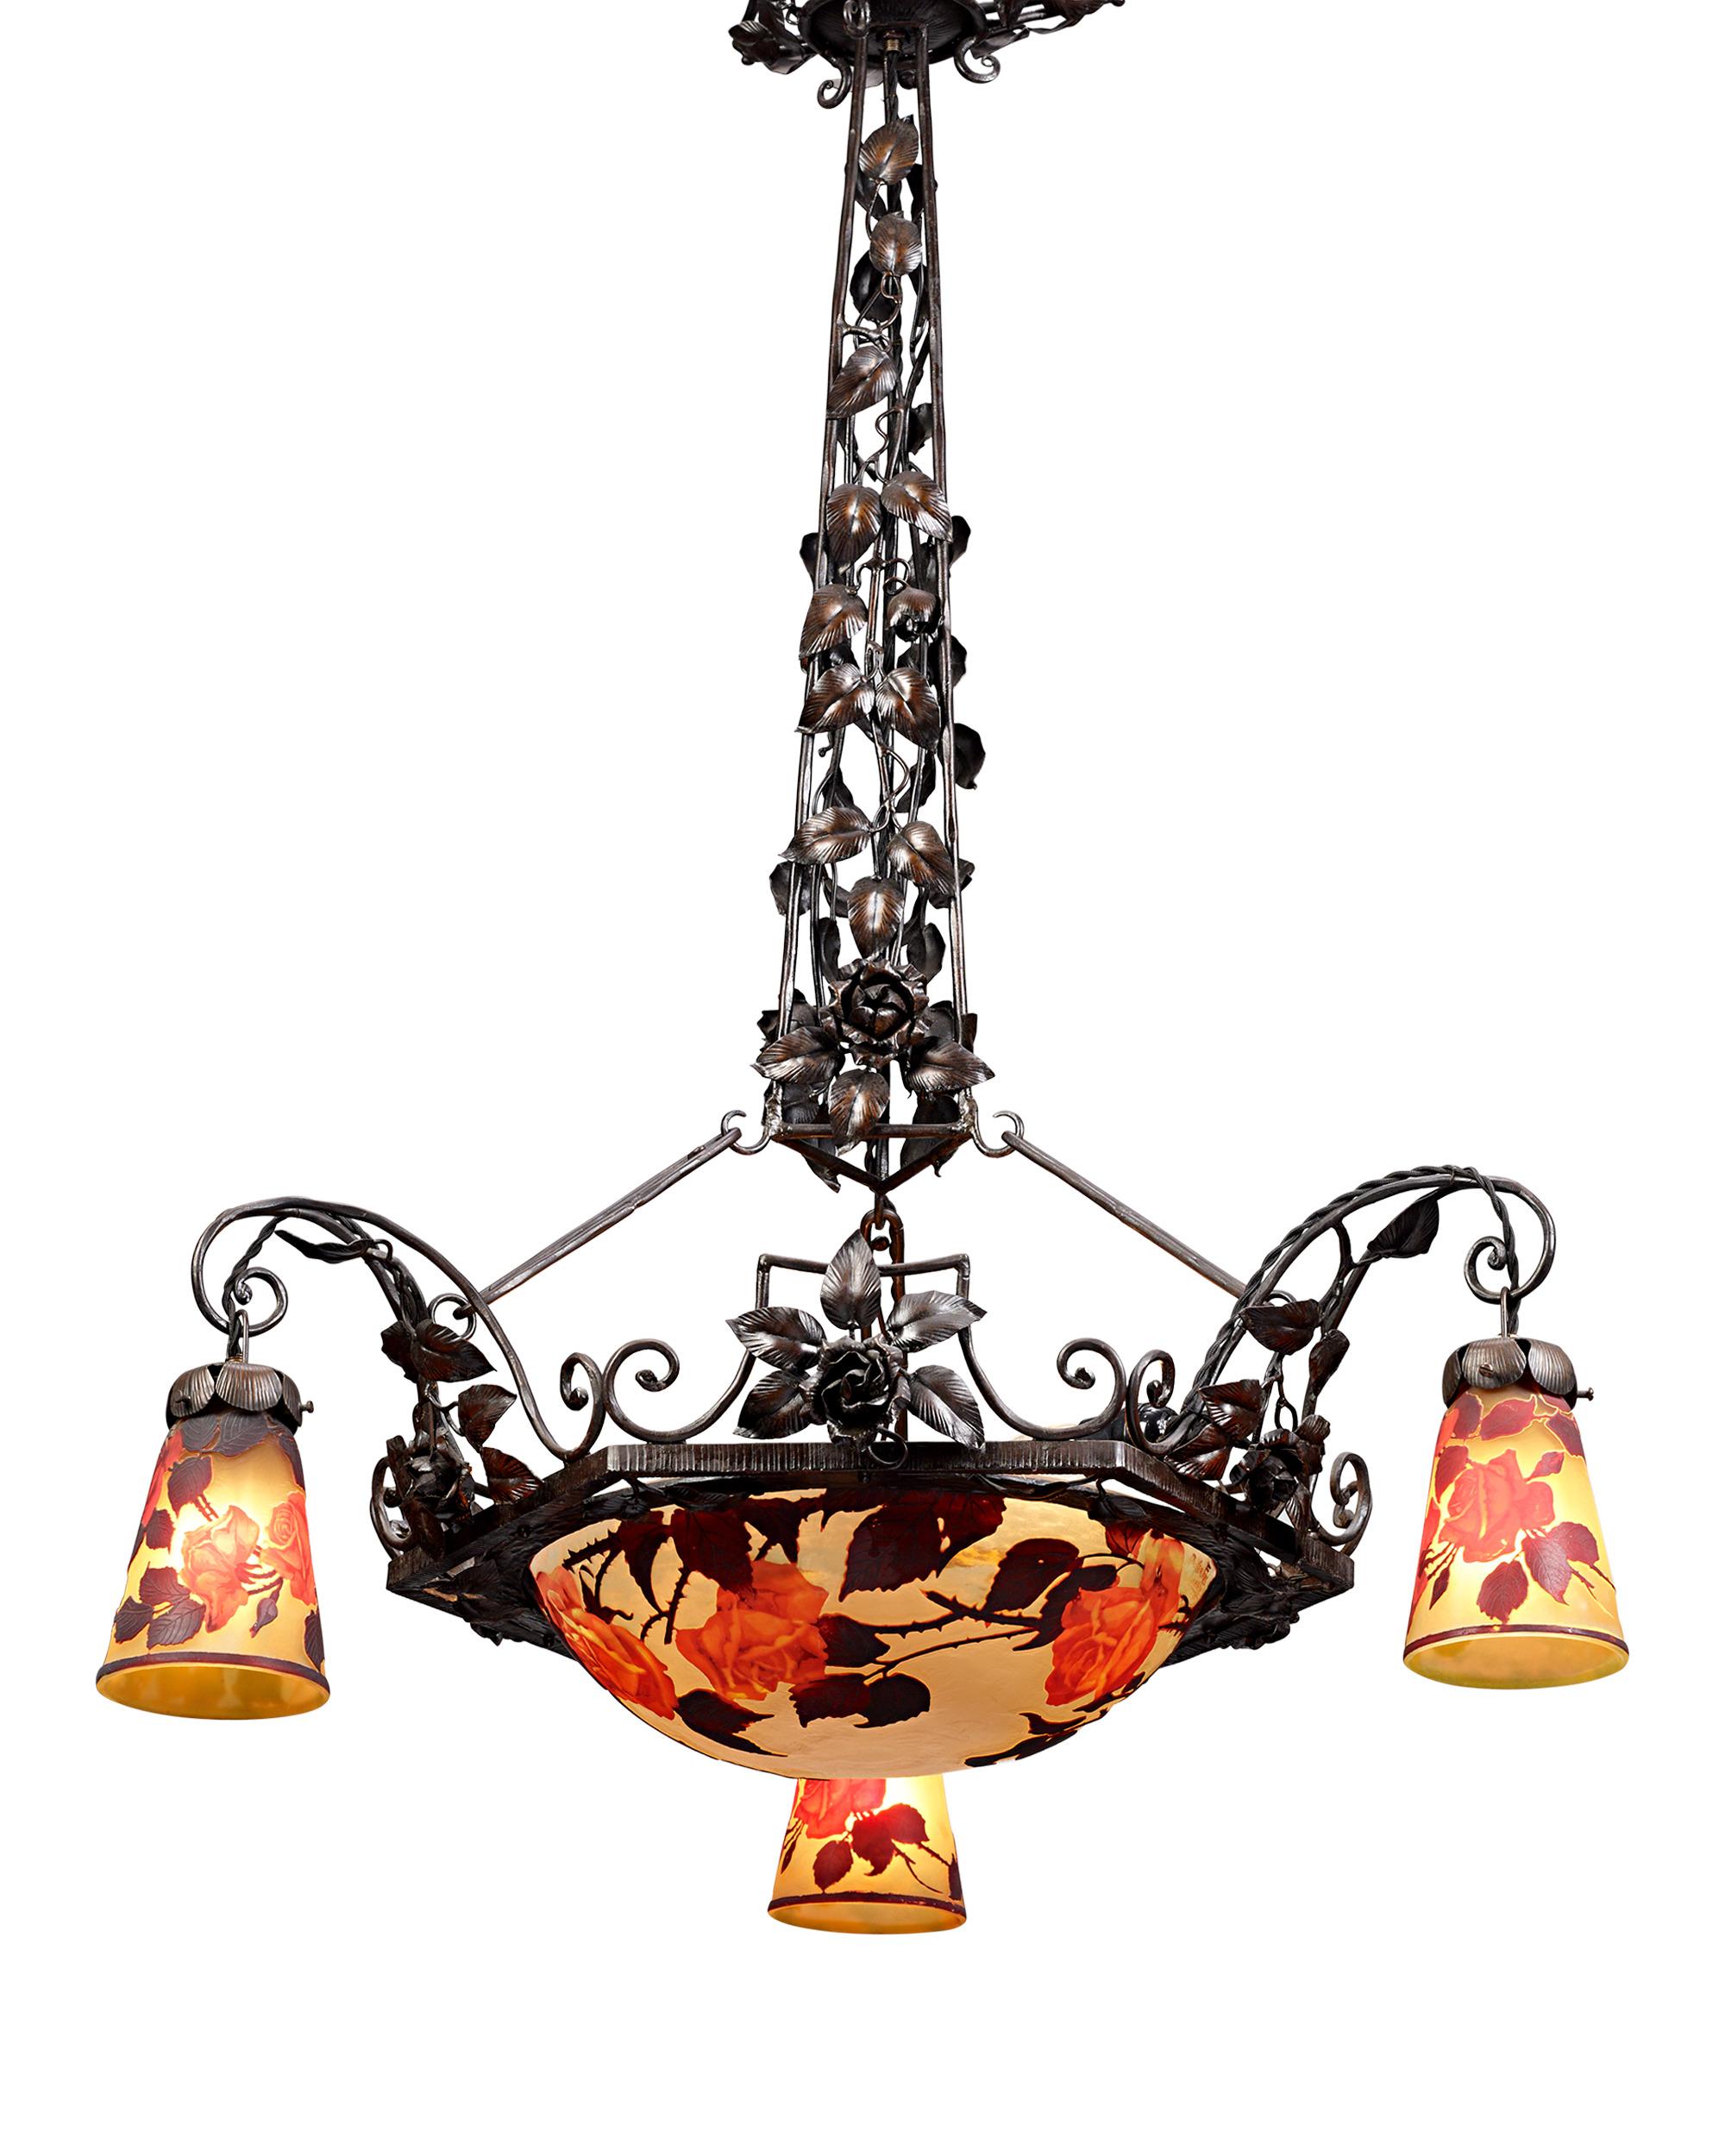 This captivating Art Nouveau chandelier by Muller Frères embodies the pinnacle of French decorative arts during this illustrious period. Muller Frères, renowned for their mastery in glassmaking, created this four-light chandelier with exquisite